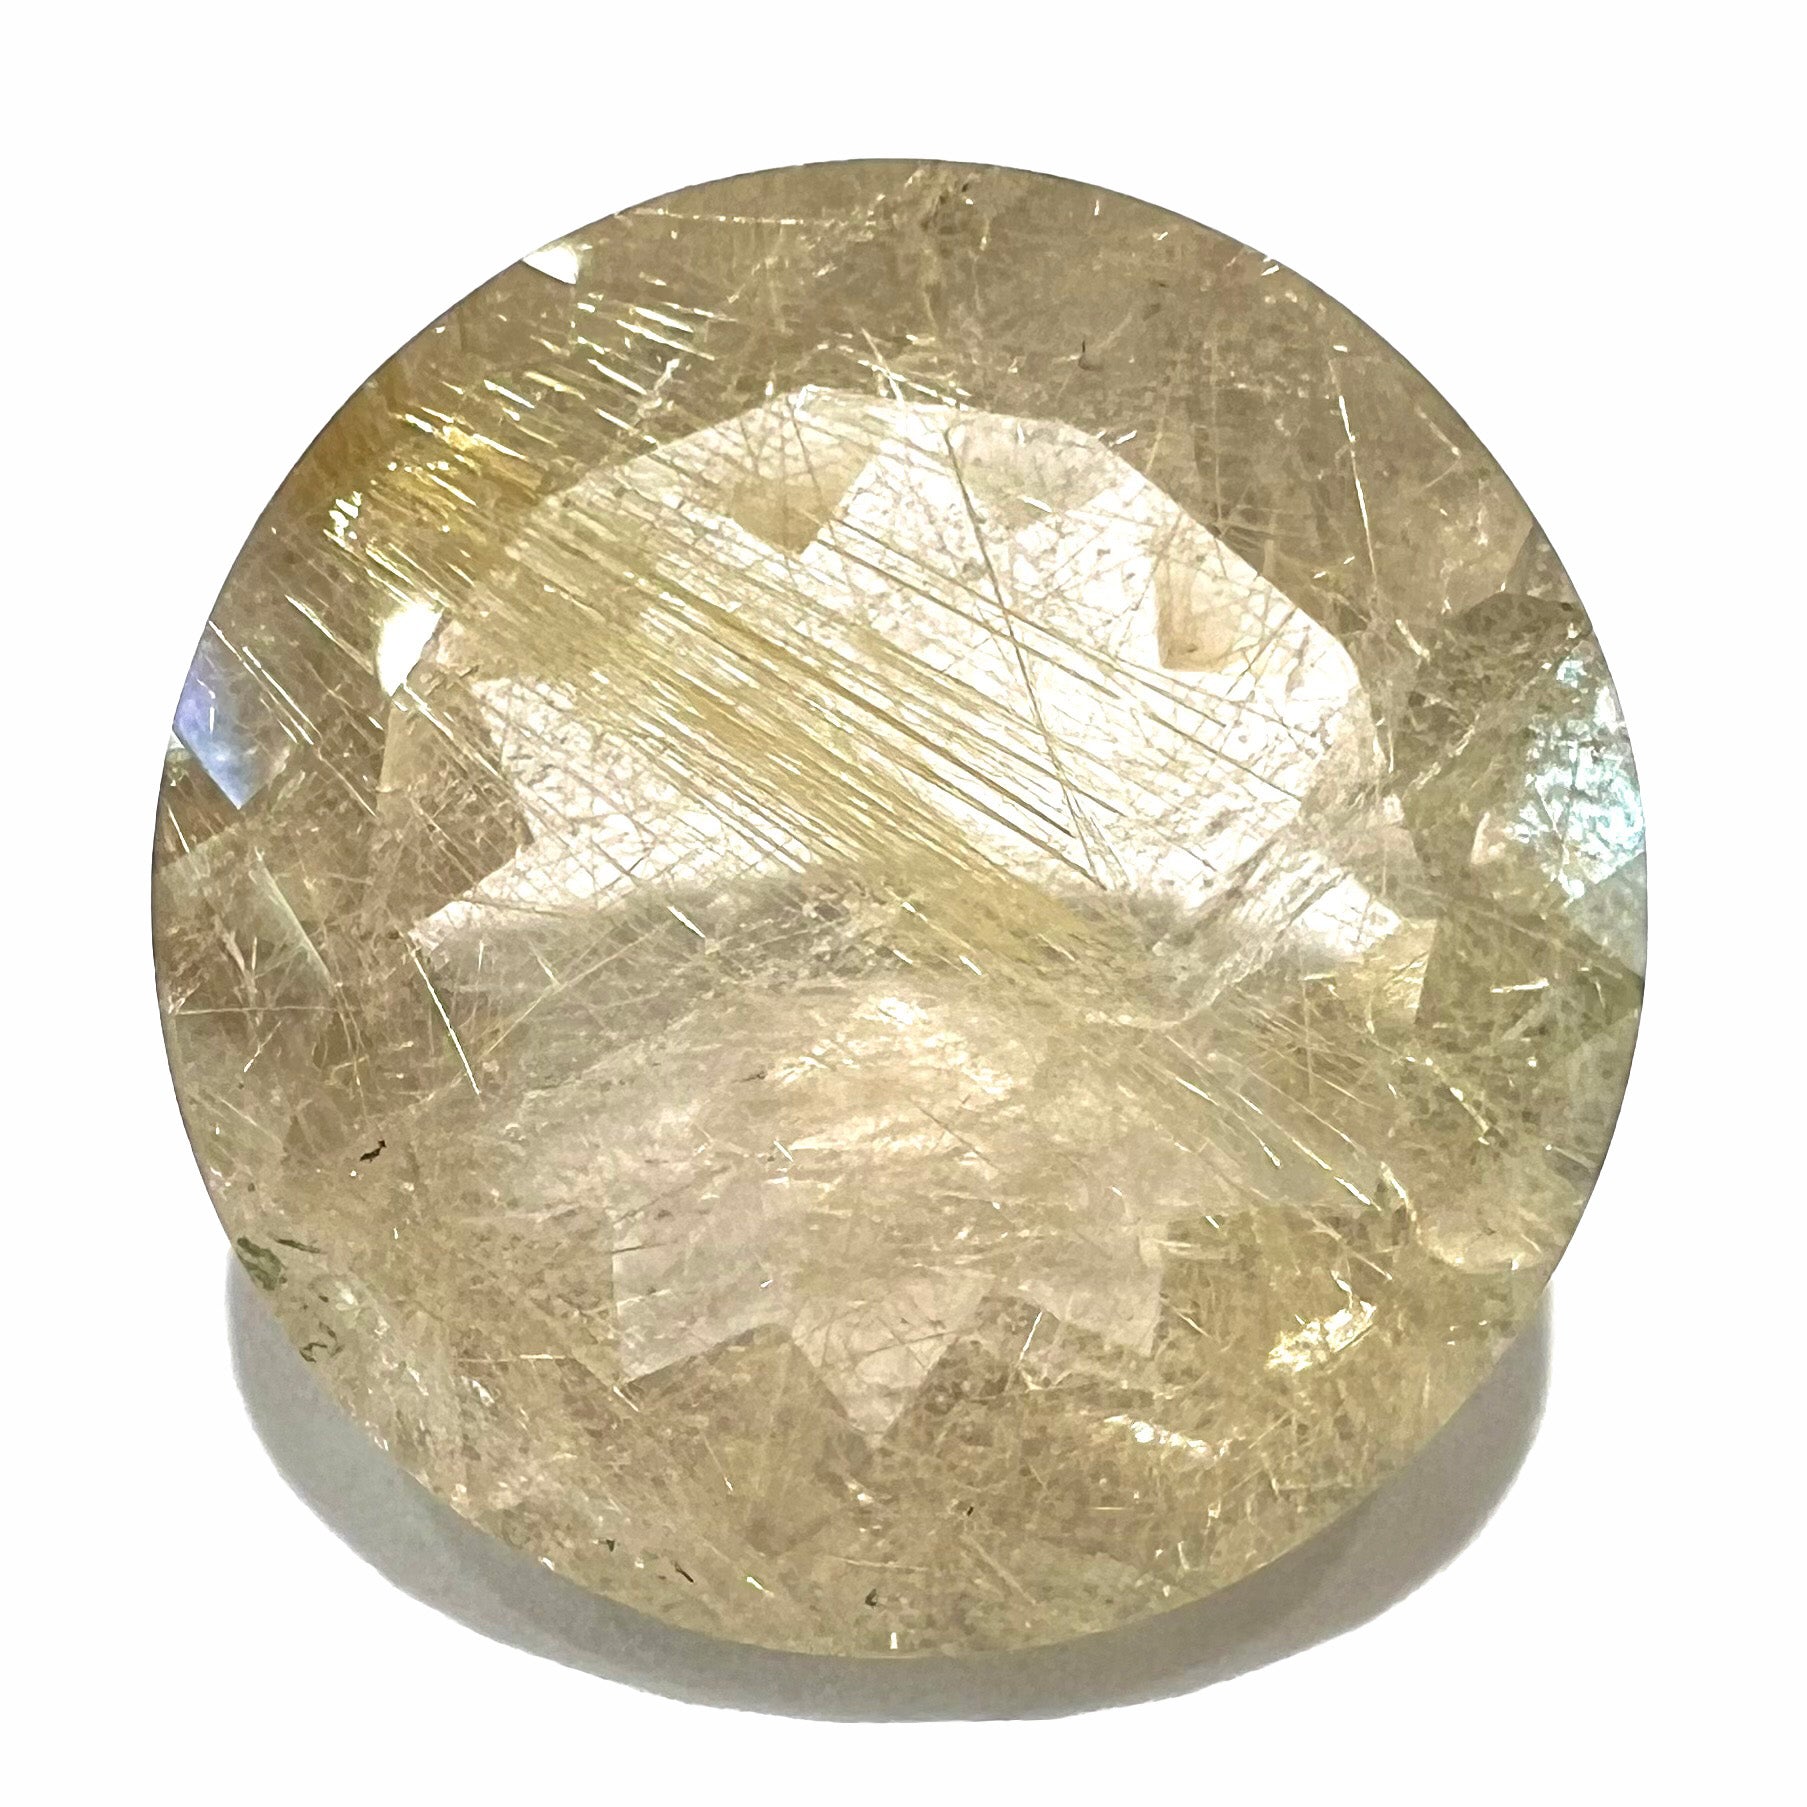 A loose, modified Early American round cut rutilated quartz gemstone.  The rutile inclusions are a golden color.